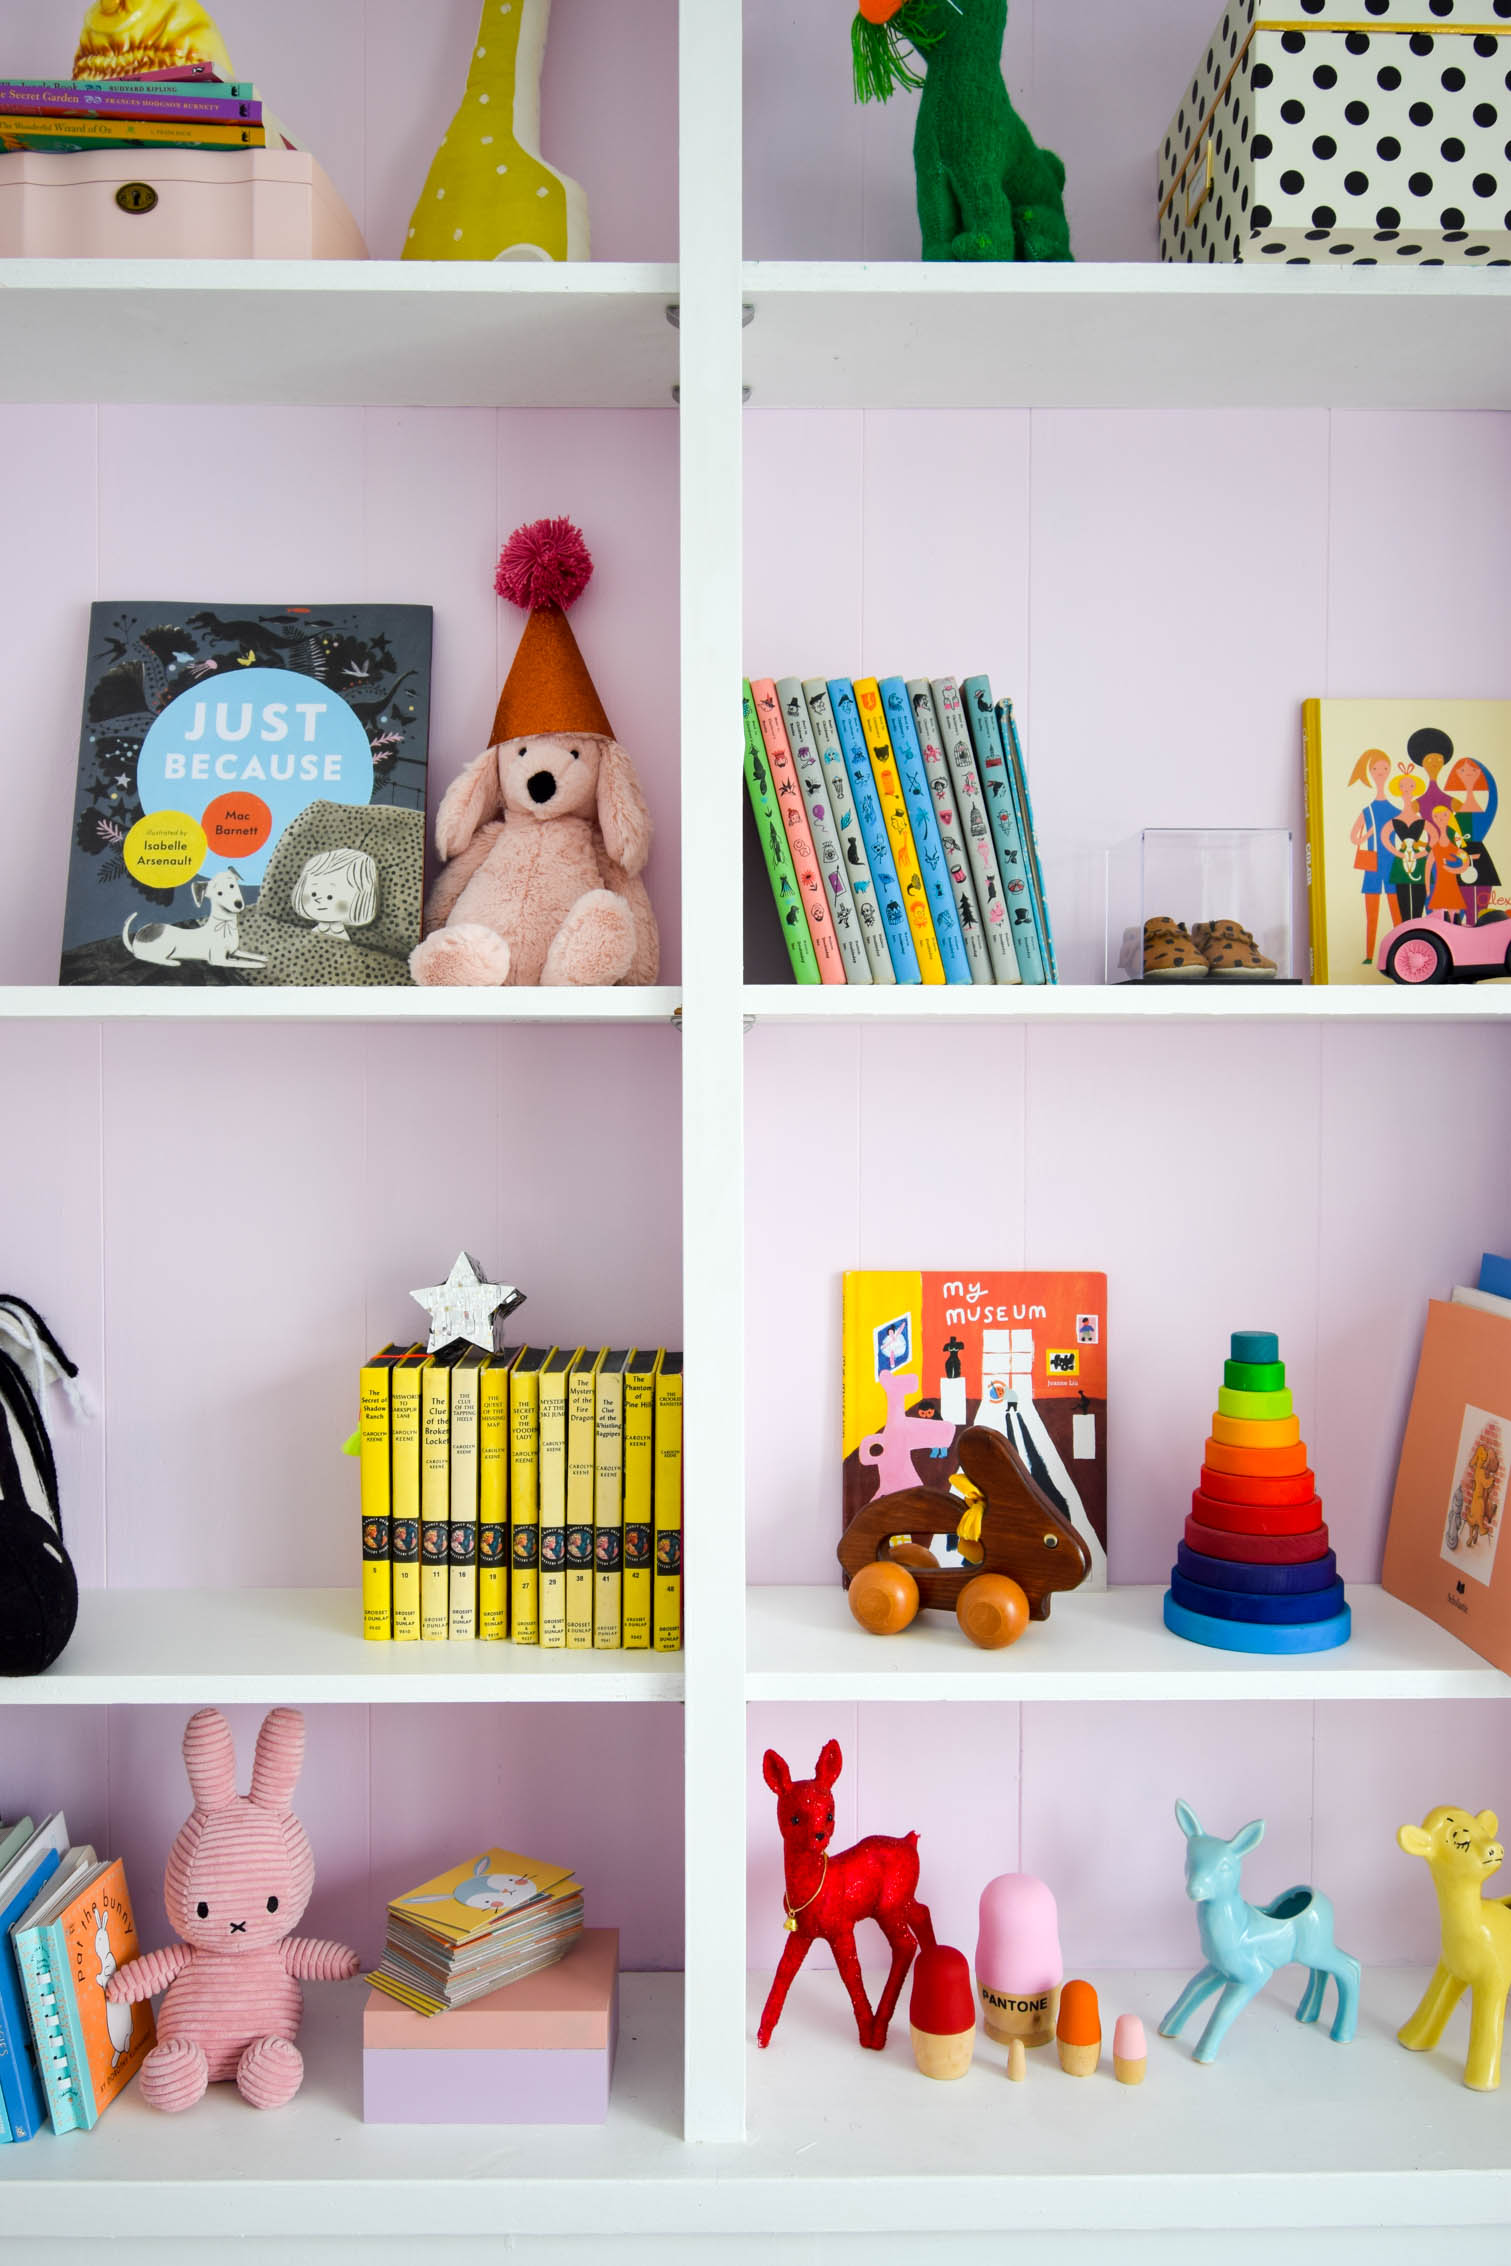 My tried and tested nursery bookshelf styling tips are easy to do, and will make any space look playful and expertly designed.